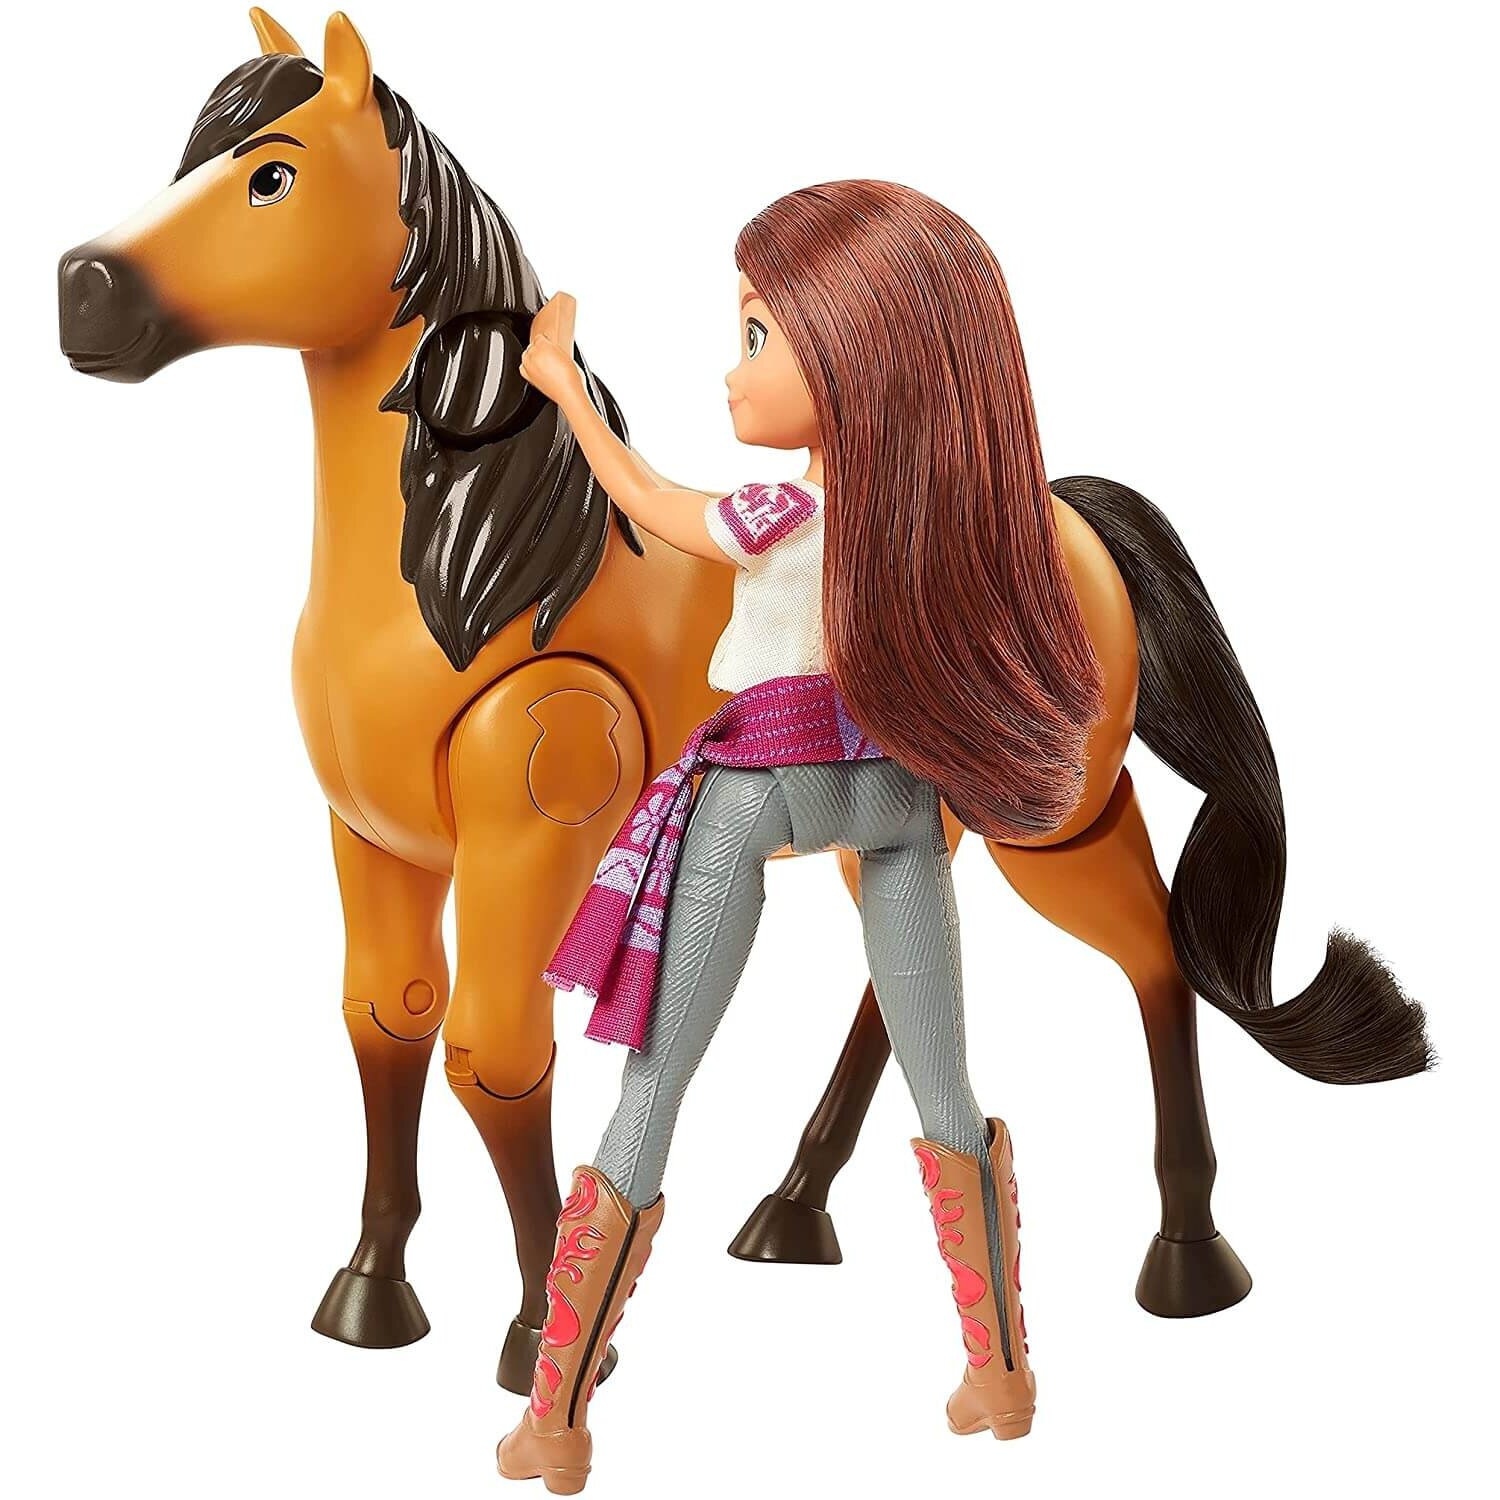 Spirit Untamed Ride Together Lucky Doll and Spirit